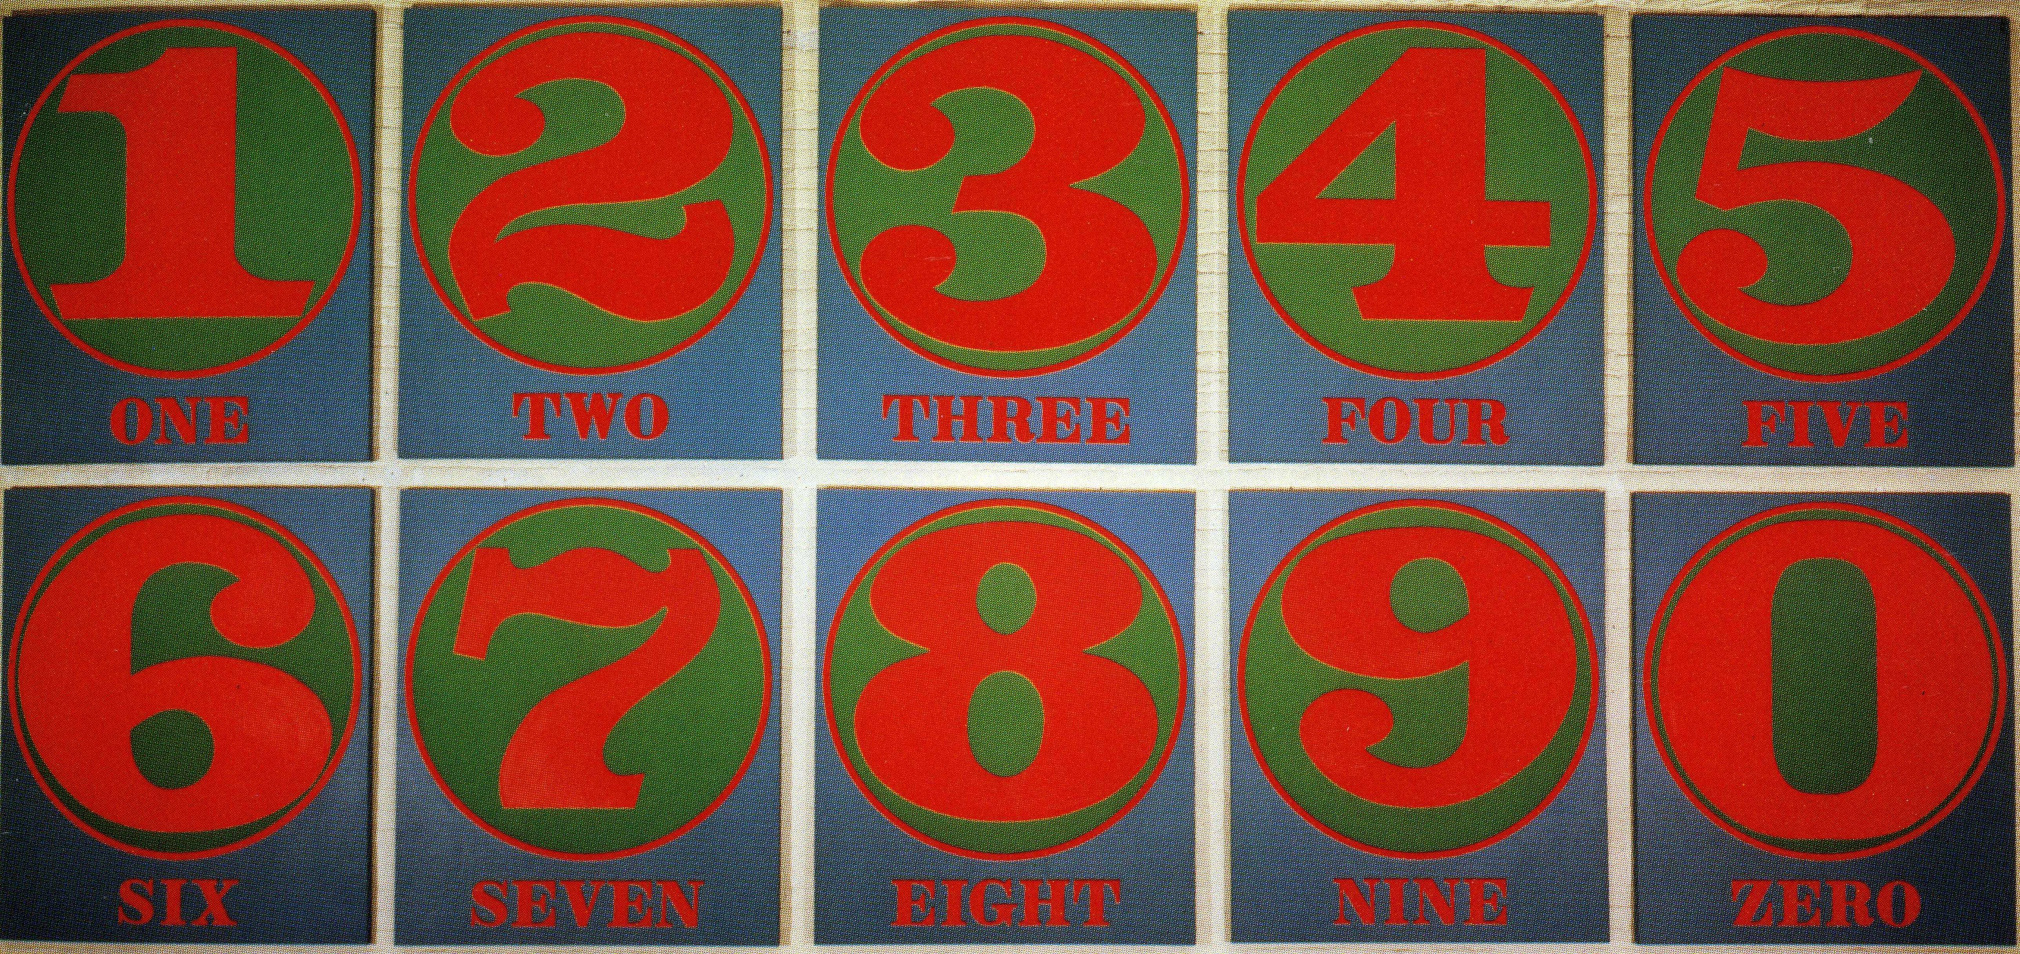 The Cardinal Numbers, ten 60 by 50 inch blue canvases, each with a red numeral between one and zero within a green circle with a red outline. Below the circle the name of the number in the circle is painted in red letters. In this image five works are displayed in two rows horizontally - one through five in the first, and six through zero in the second.